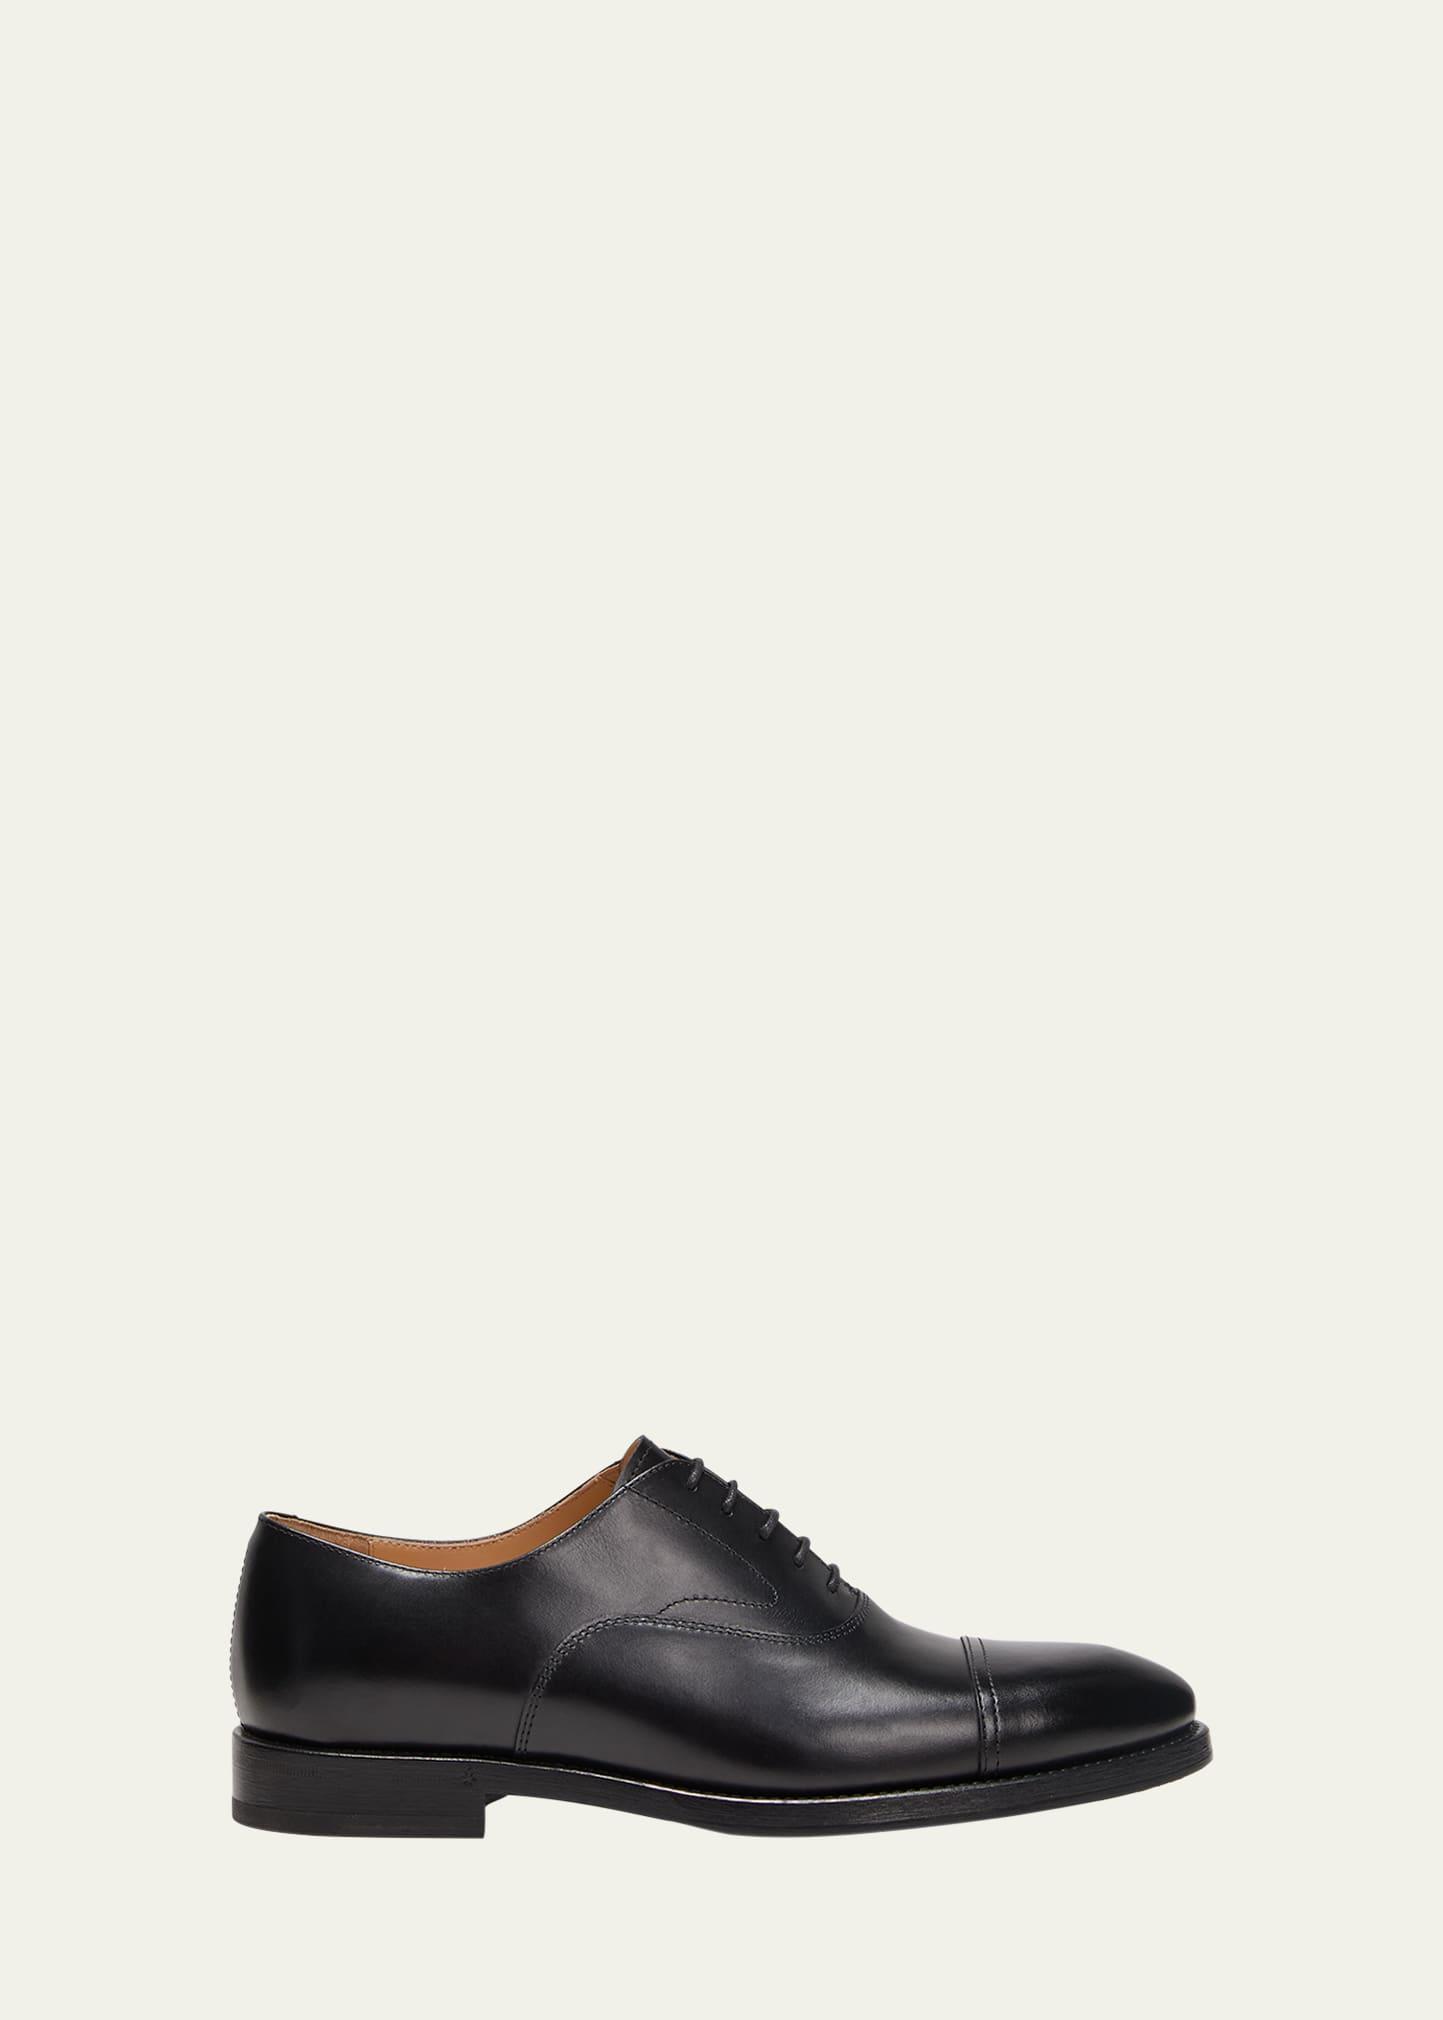 Mens Calf Leather Cap-Toe Oxfords Product Image